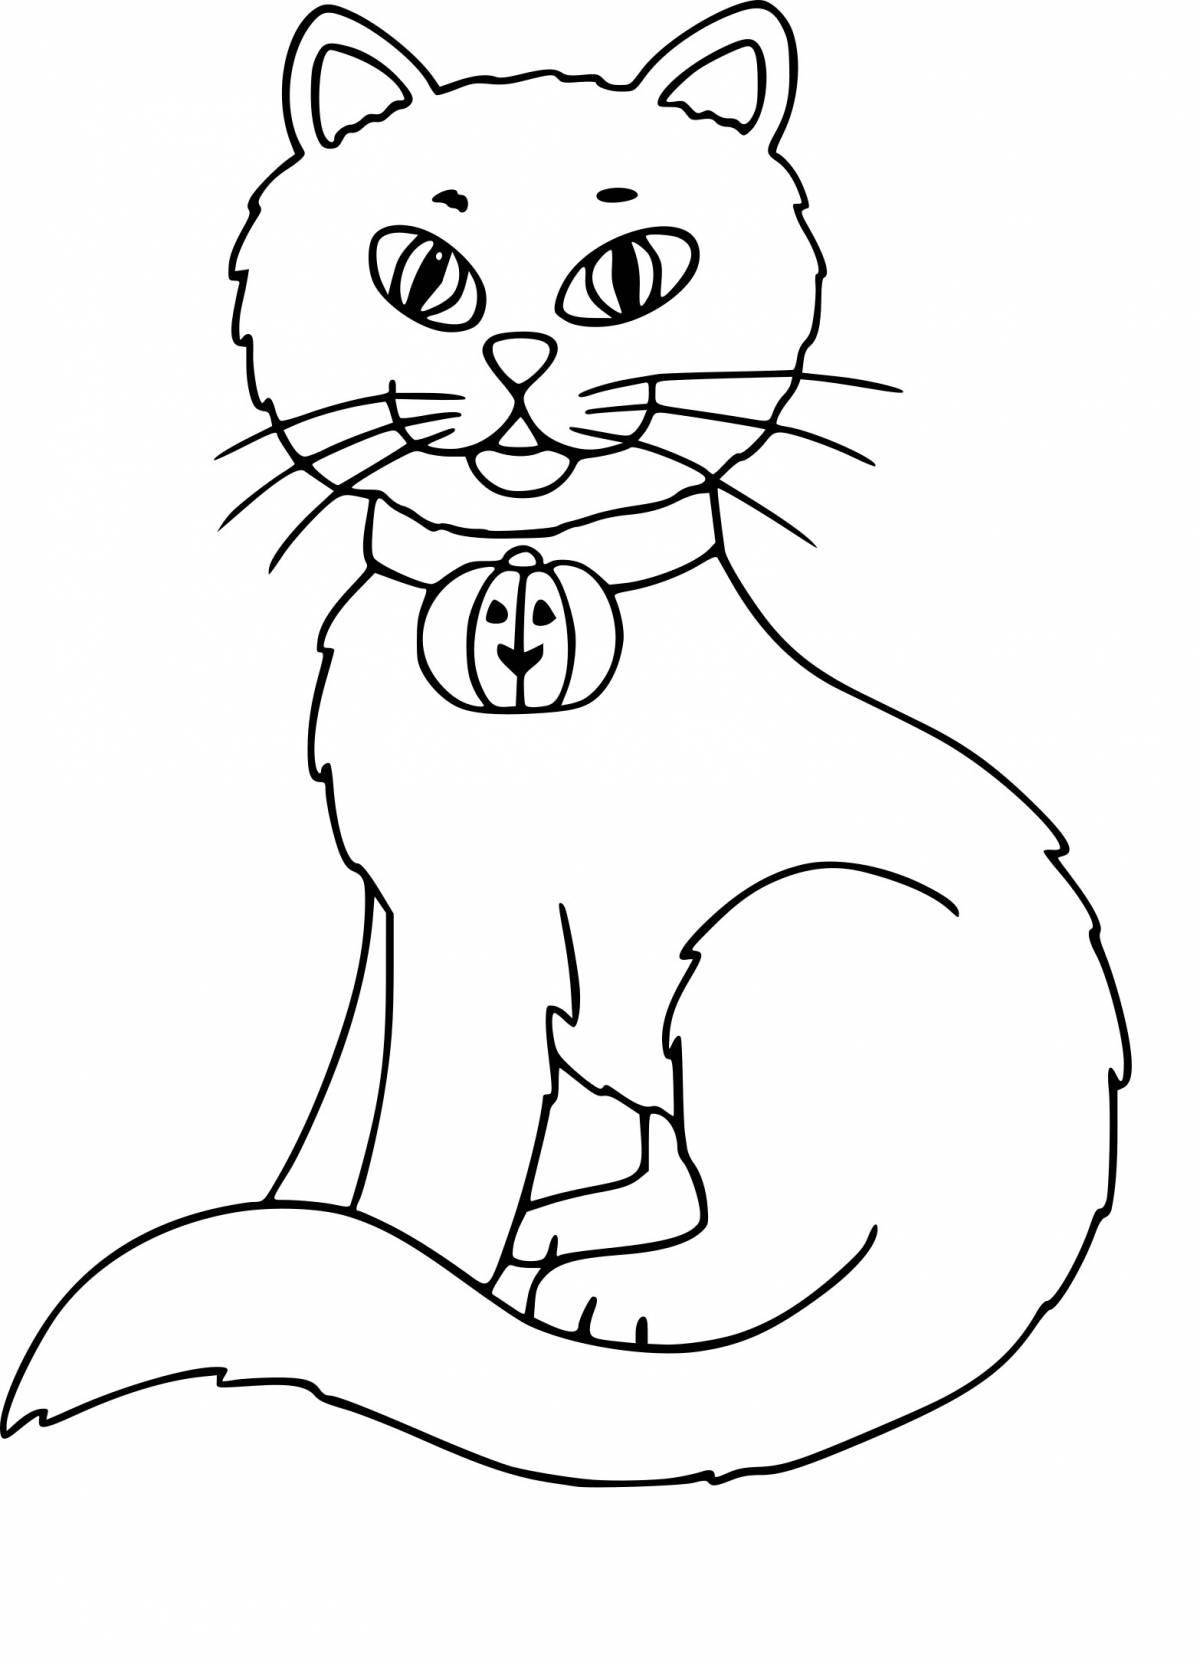 Naughty fold cat coloring page